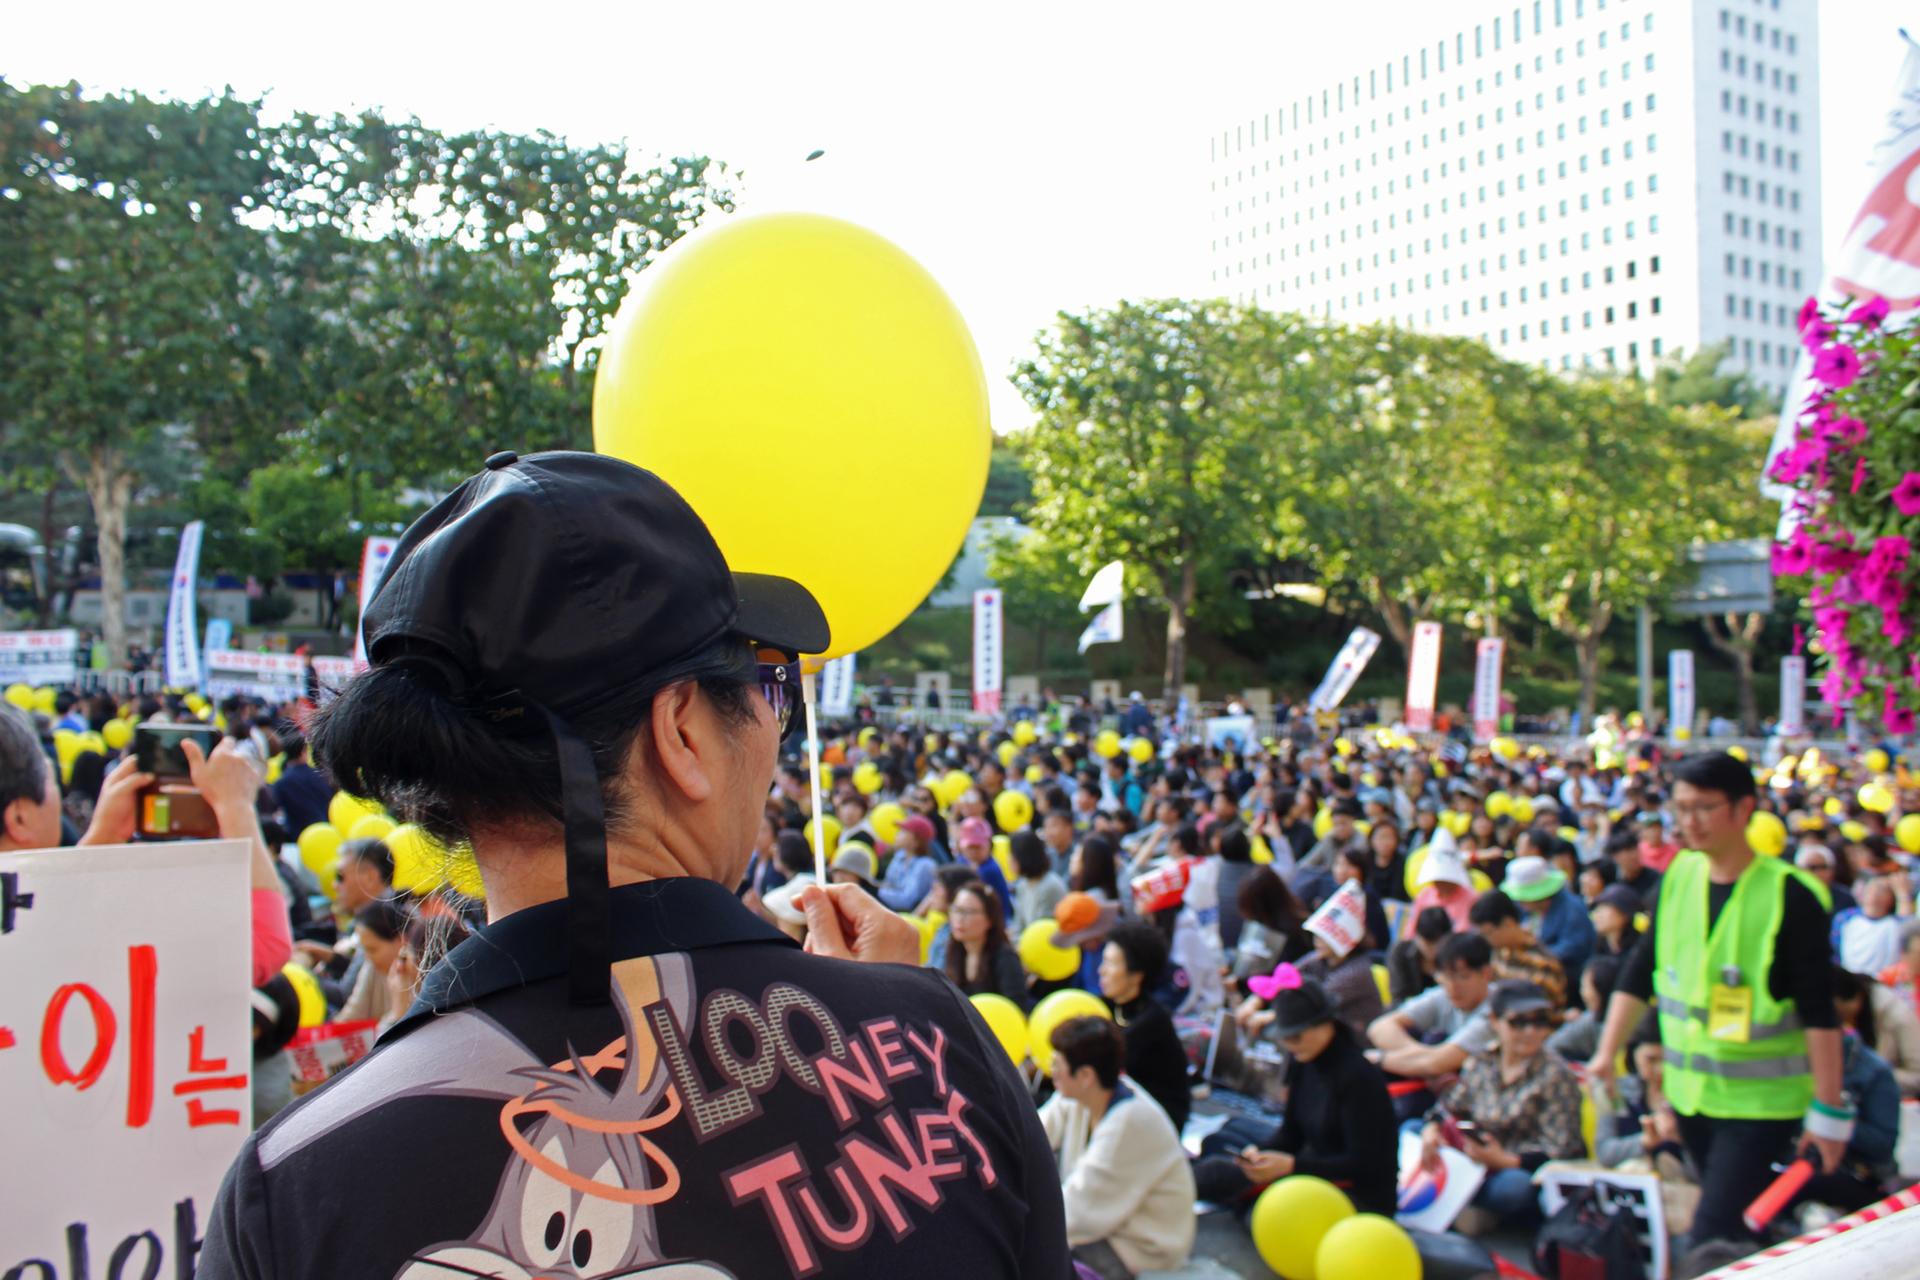 Protesters hold up signs in a protest in South Korea holding yellow balloons